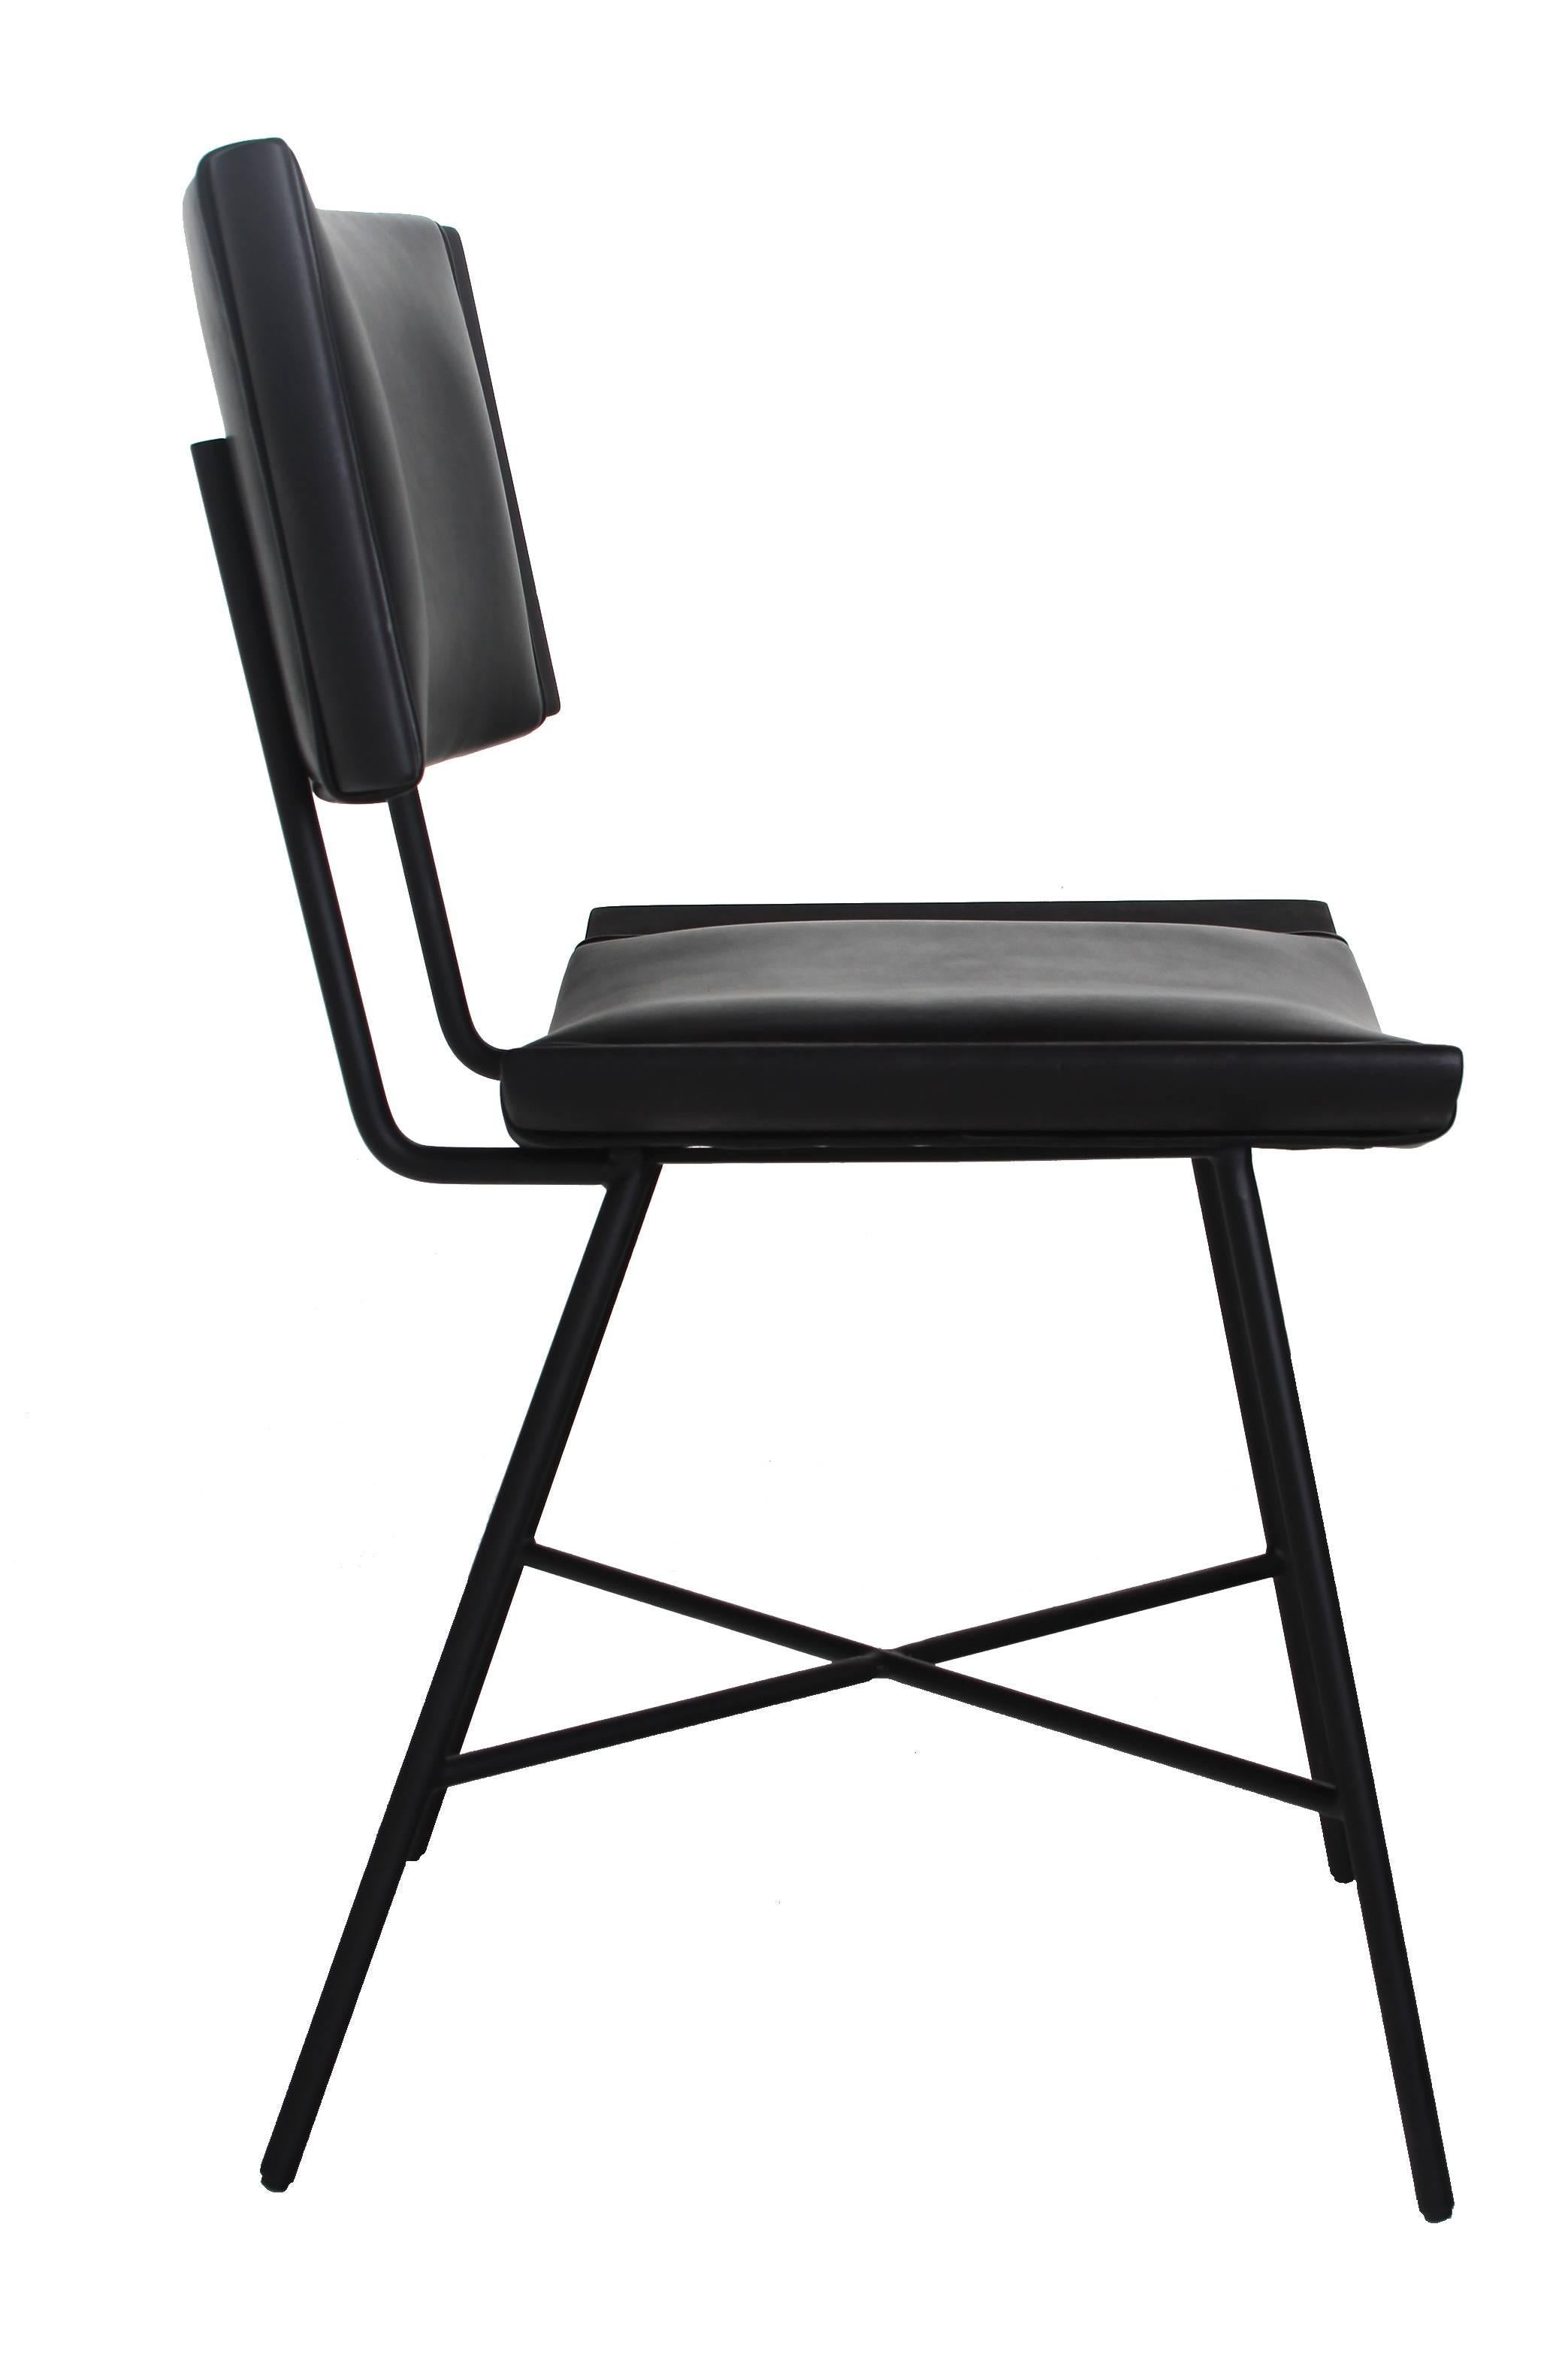 Alessandra Chair with Blackened Steel Frame by Thomas Hayes Studio In Excellent Condition For Sale In Hollywood, CA